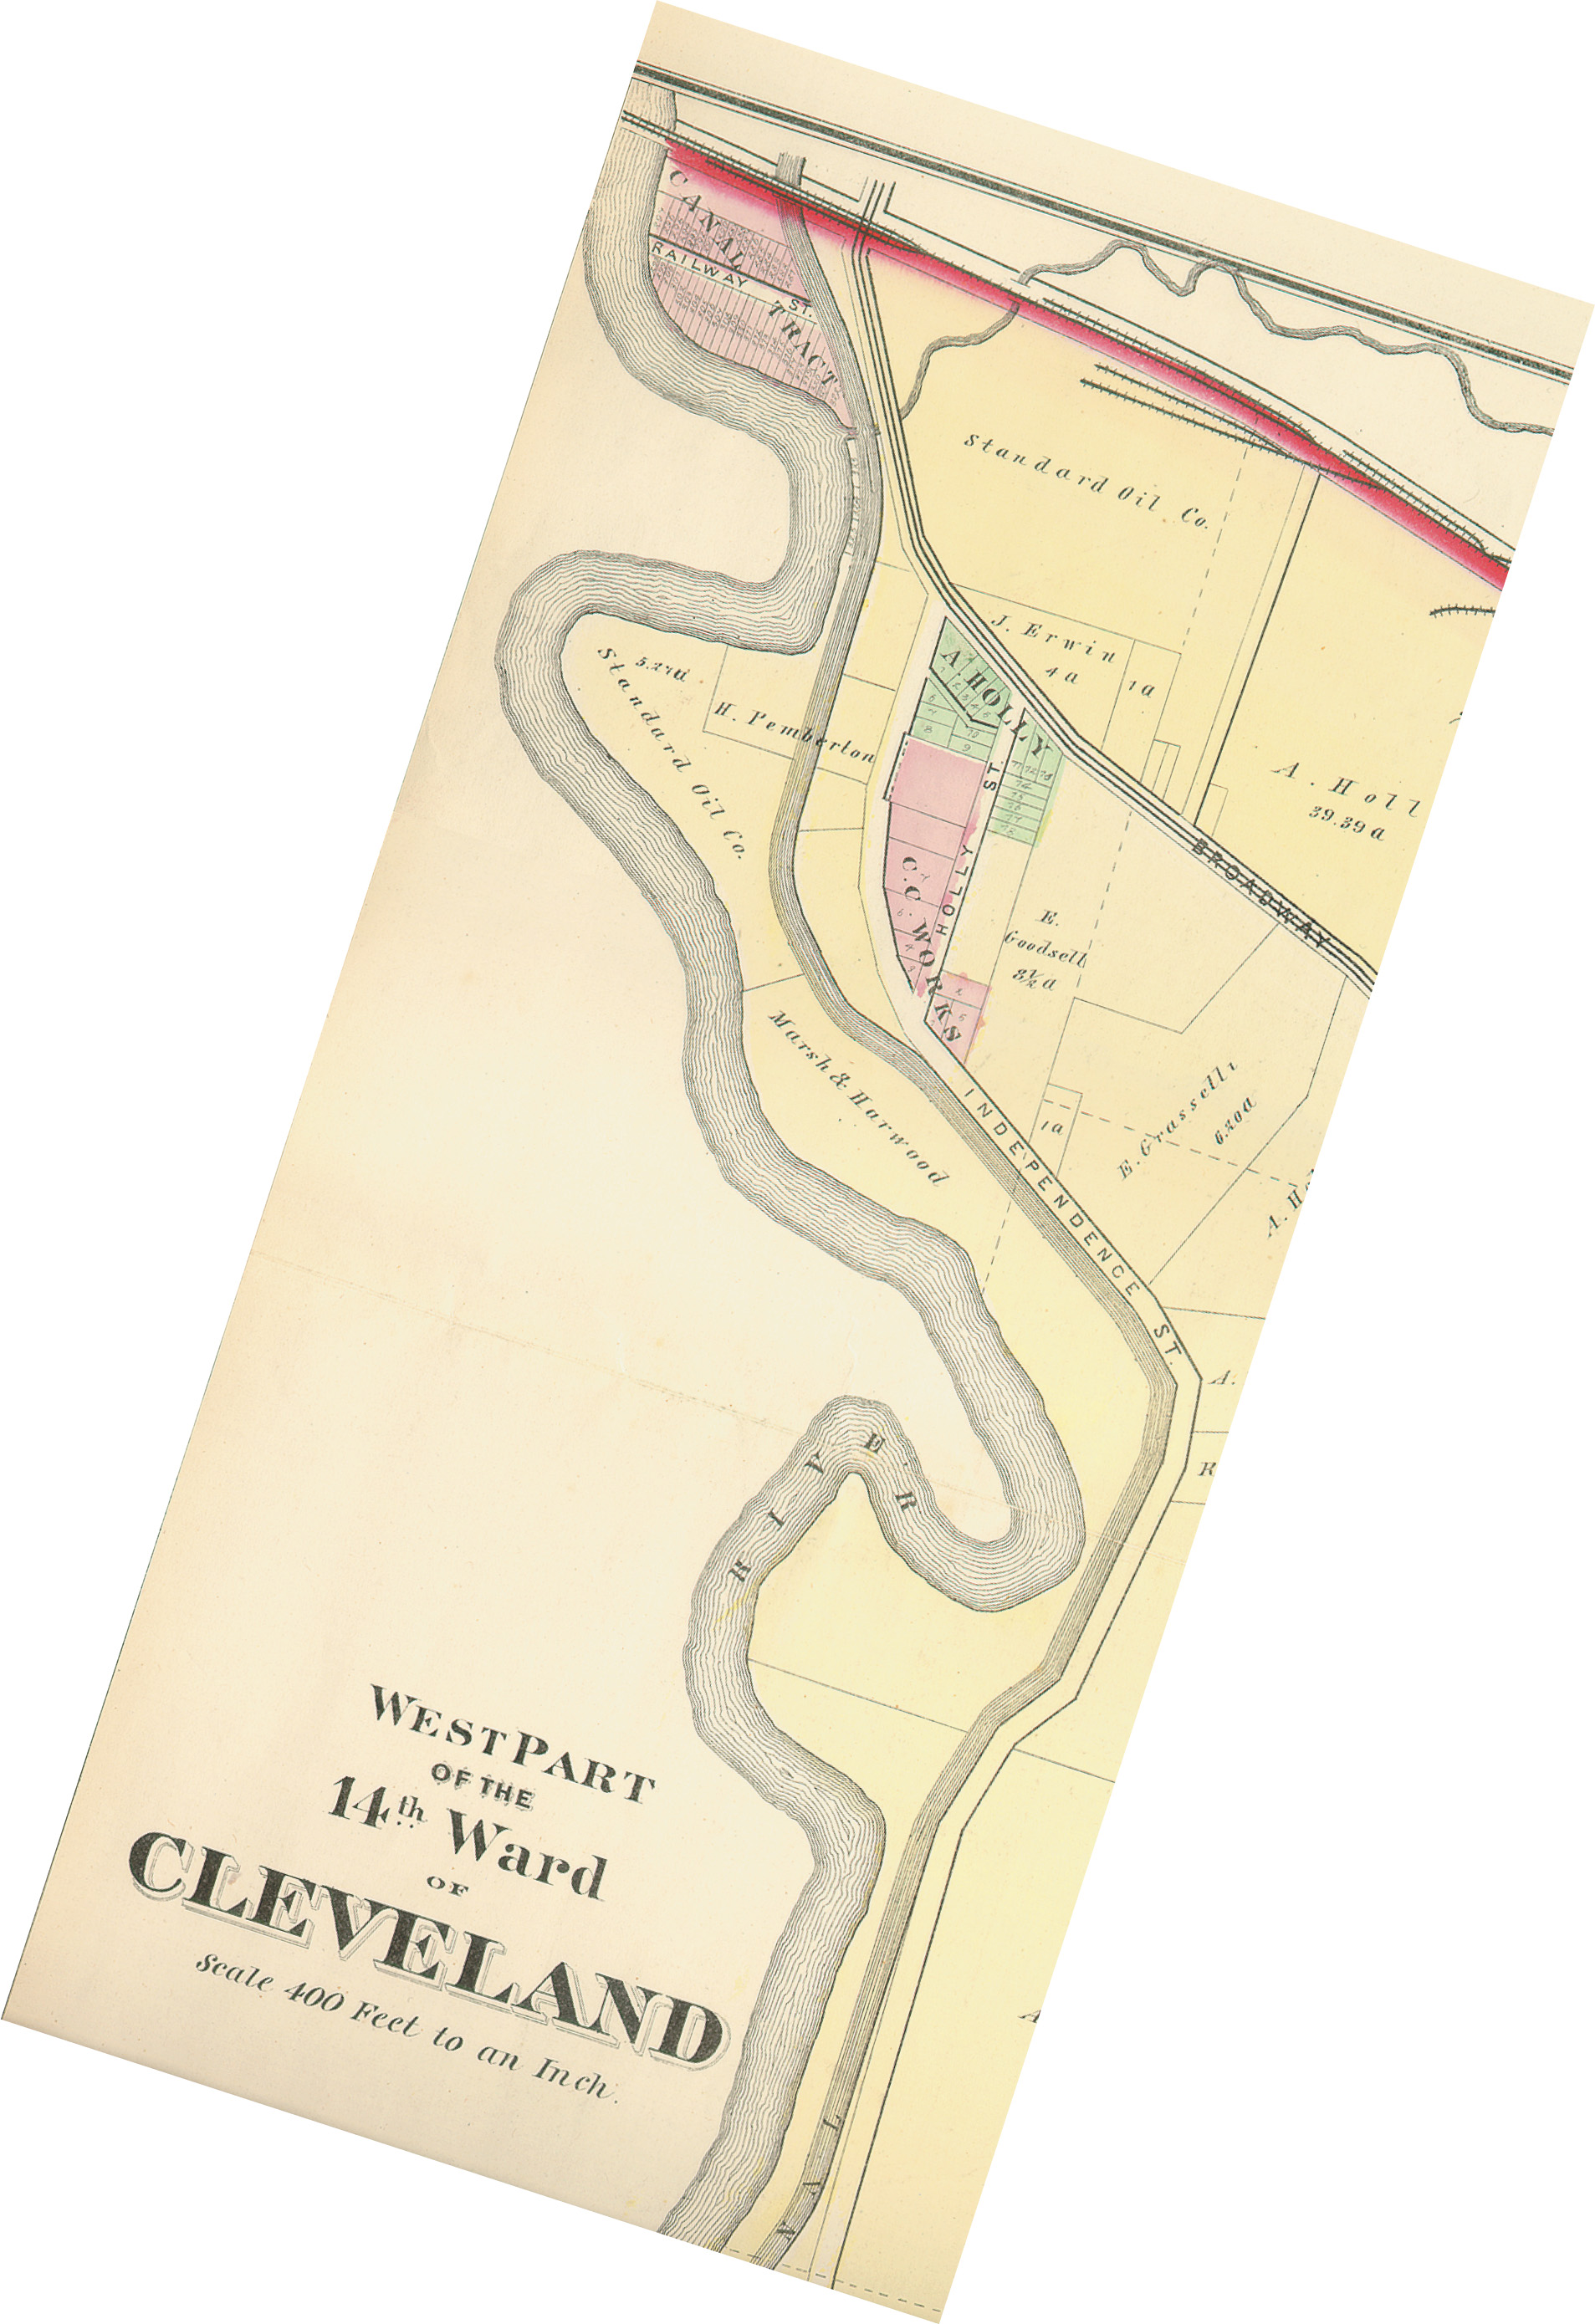 A map is titled West Part of the 44th Ward of Cleveland.